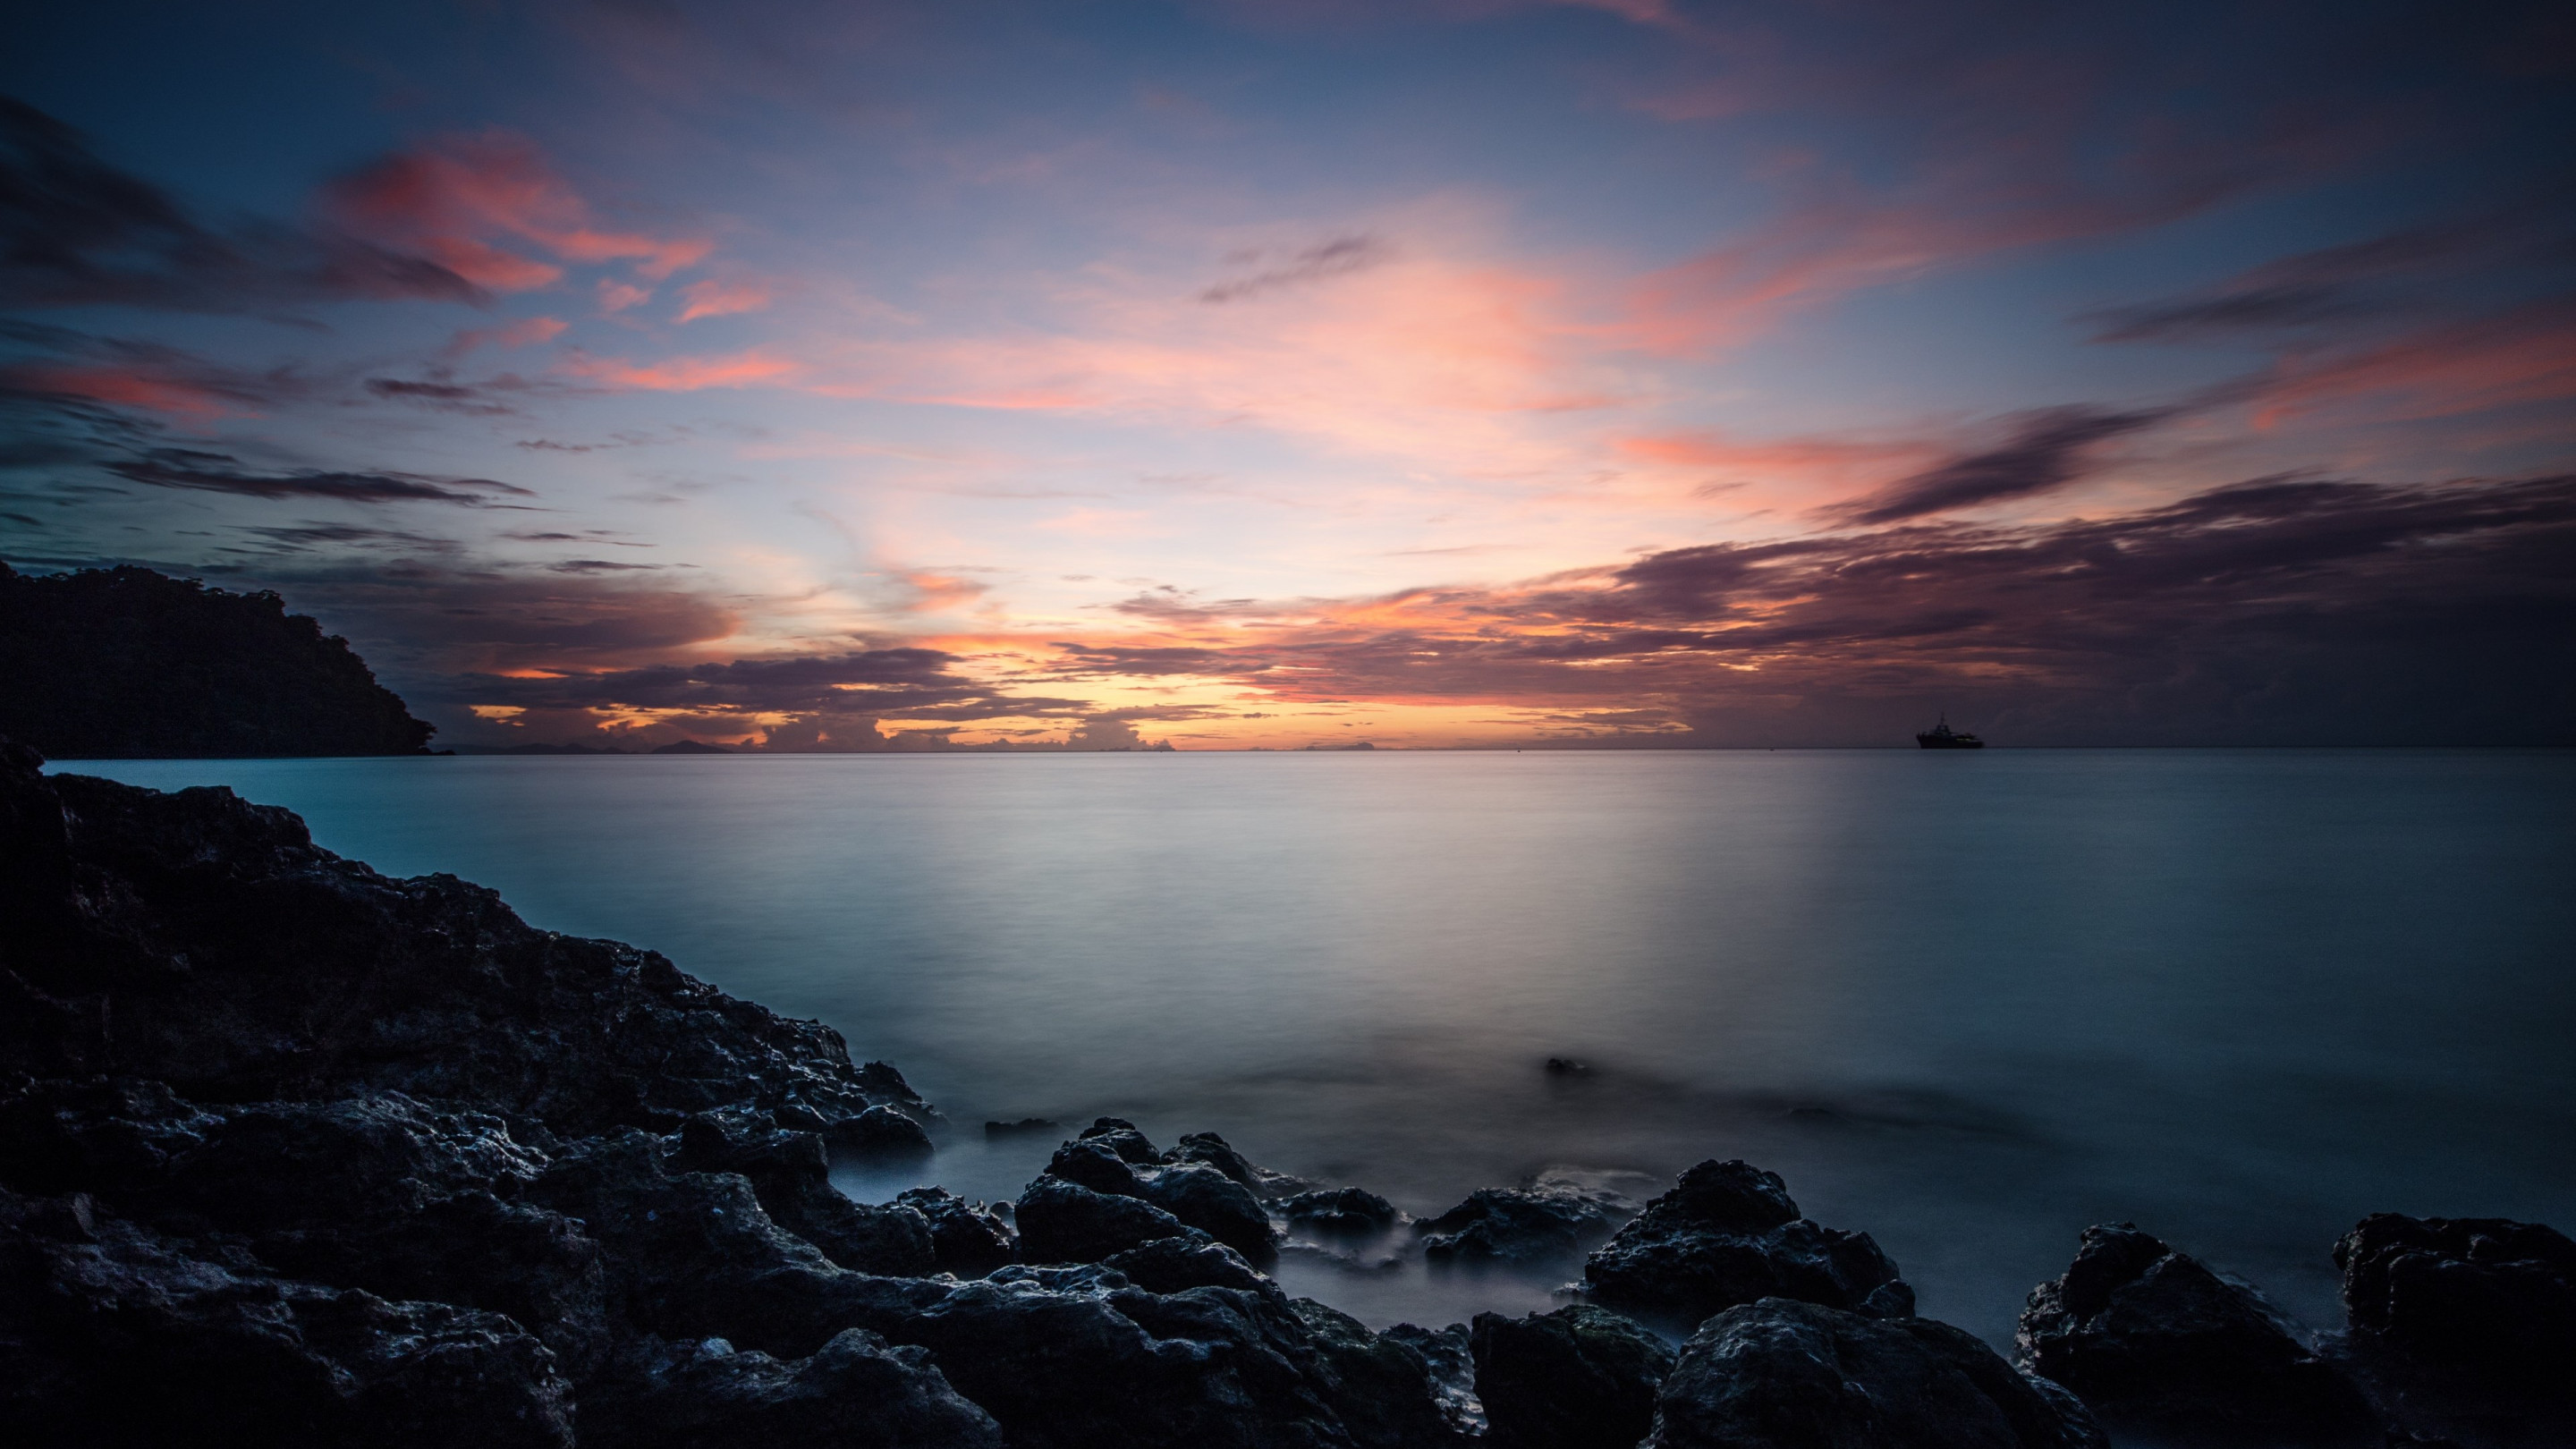 Sunset, rocks, clouds, view from Thailand wallpaper 2880x1620